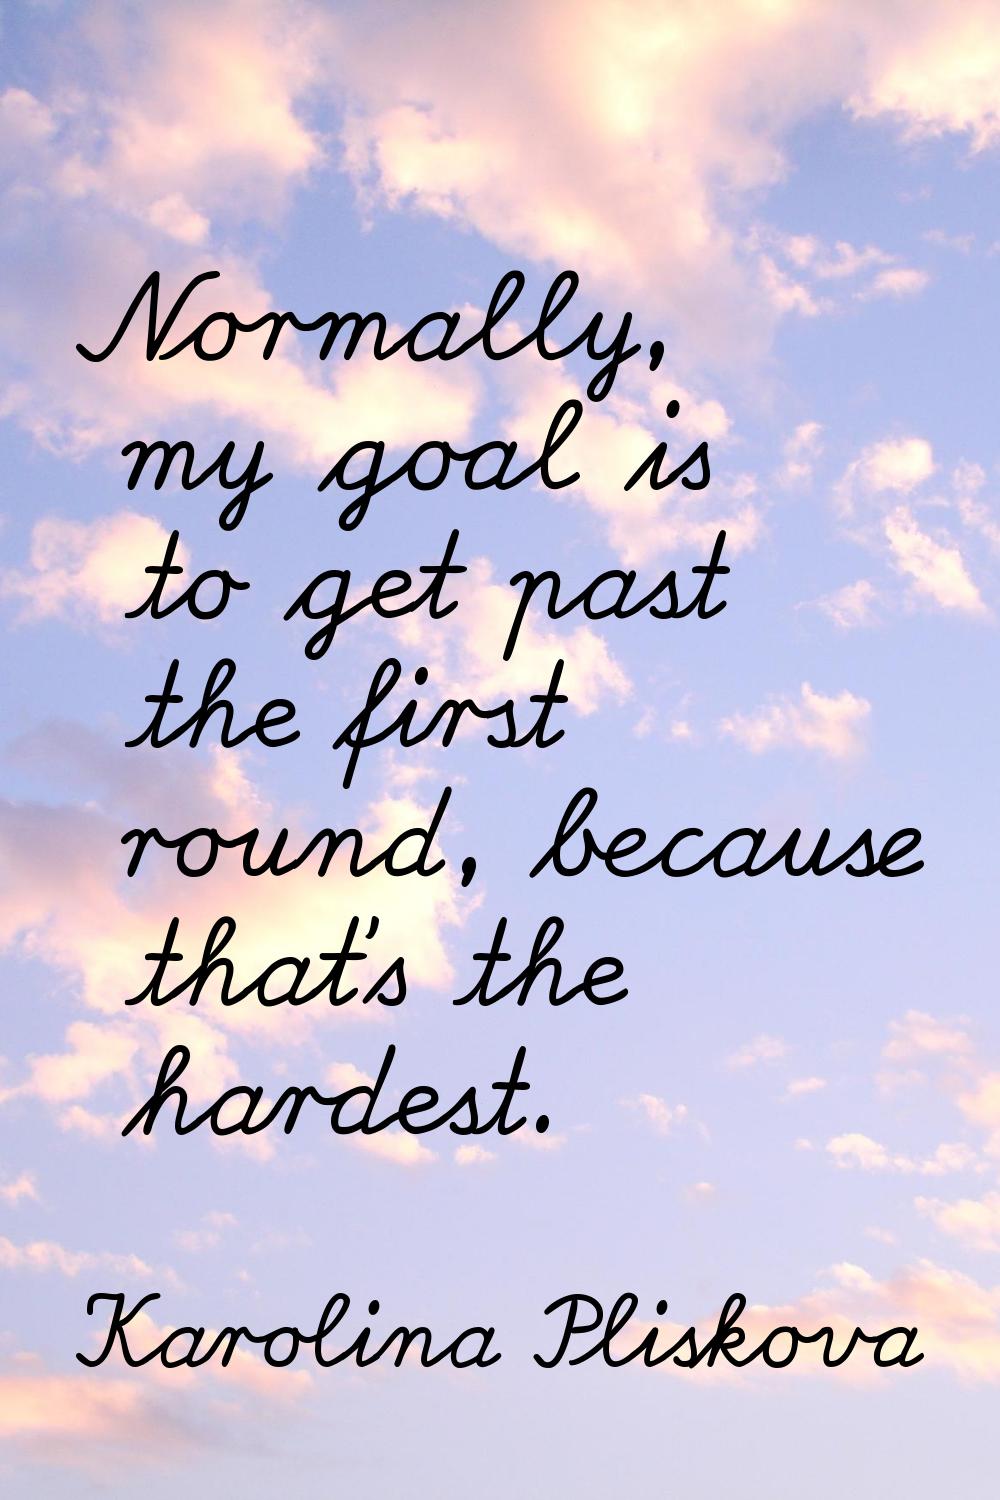 Normally, my goal is to get past the first round, because that's the hardest.